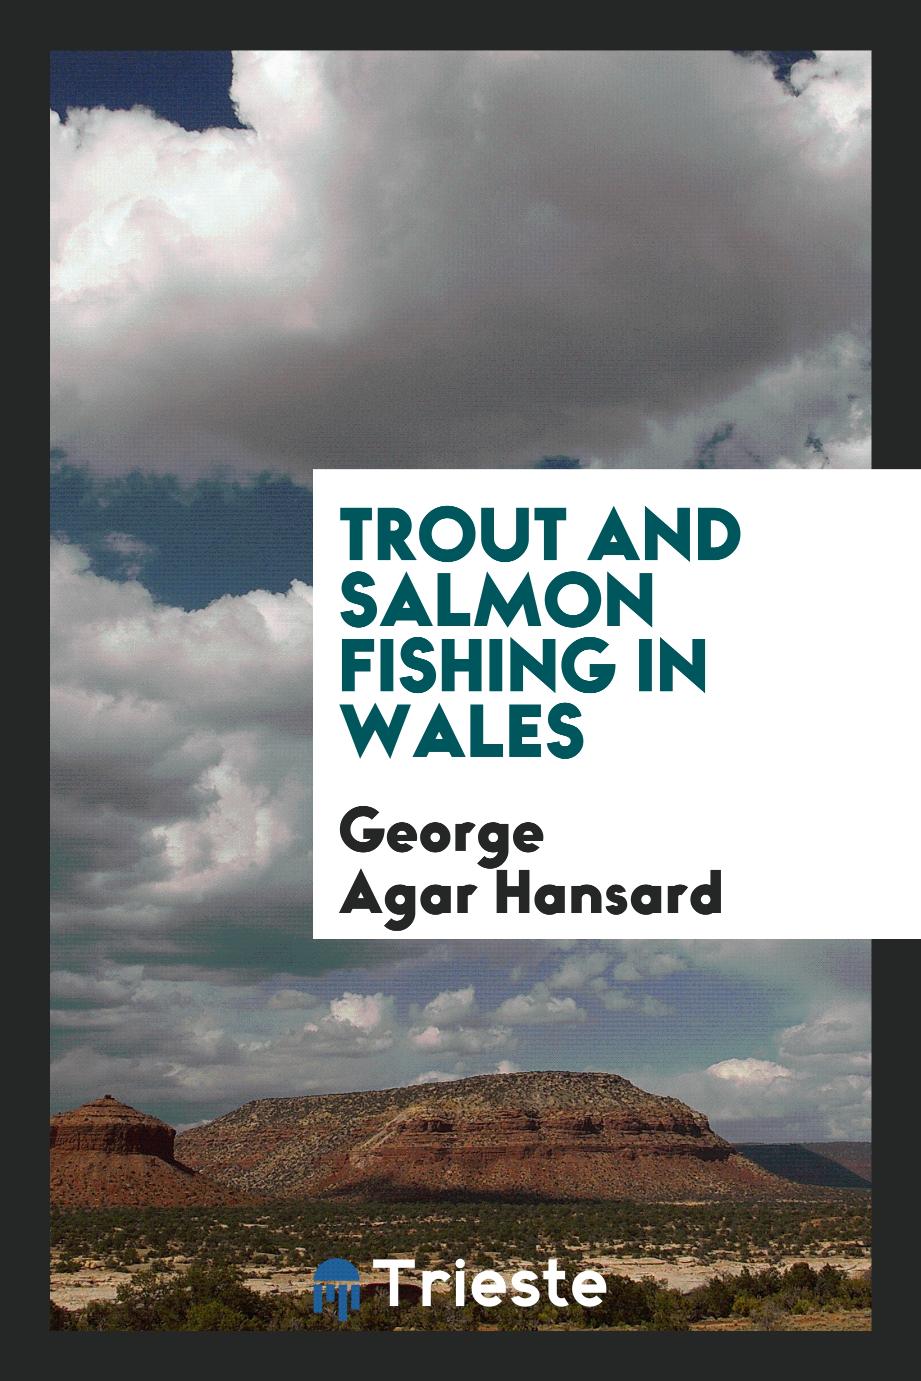 Trout and salmon fishing in Wales